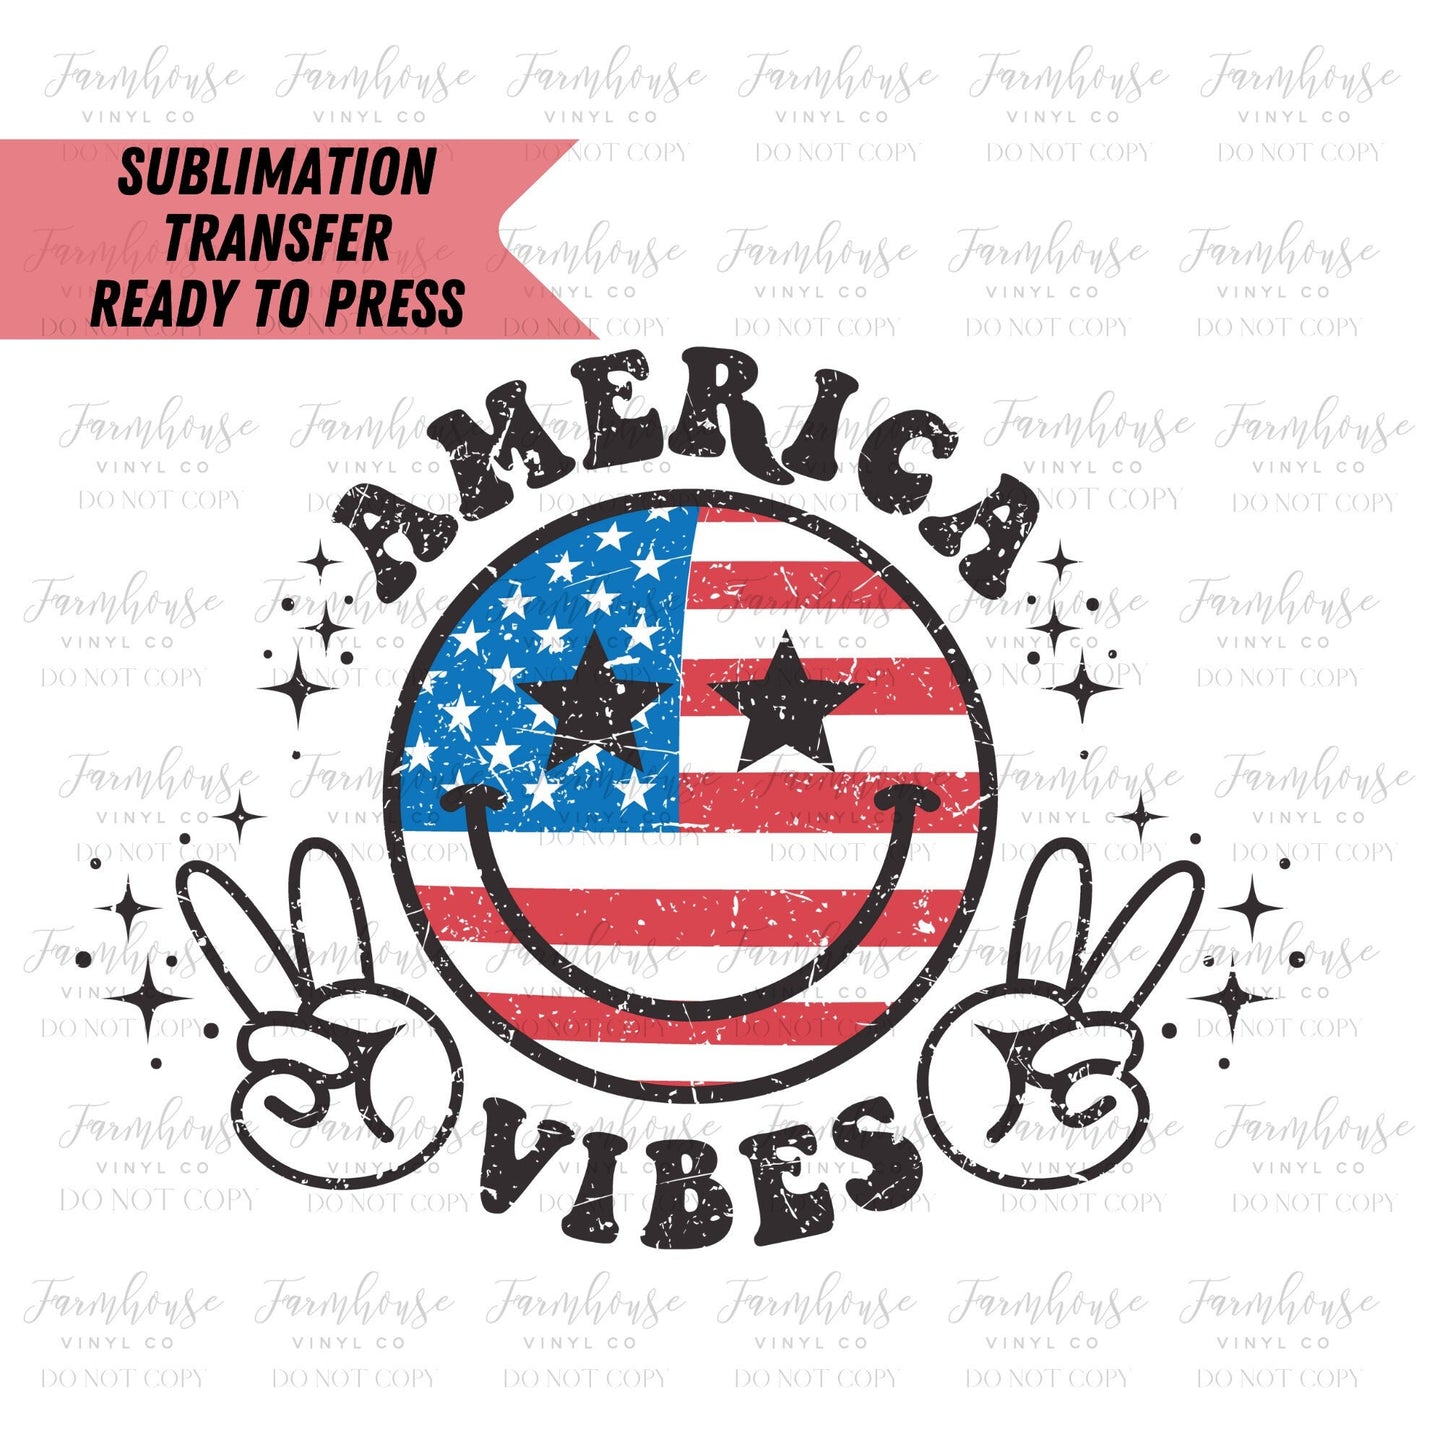 Retro 4th of July America Vibes Smiley Face Ready to Press Sublimation Transfer - Farmhouse Vinyl Co